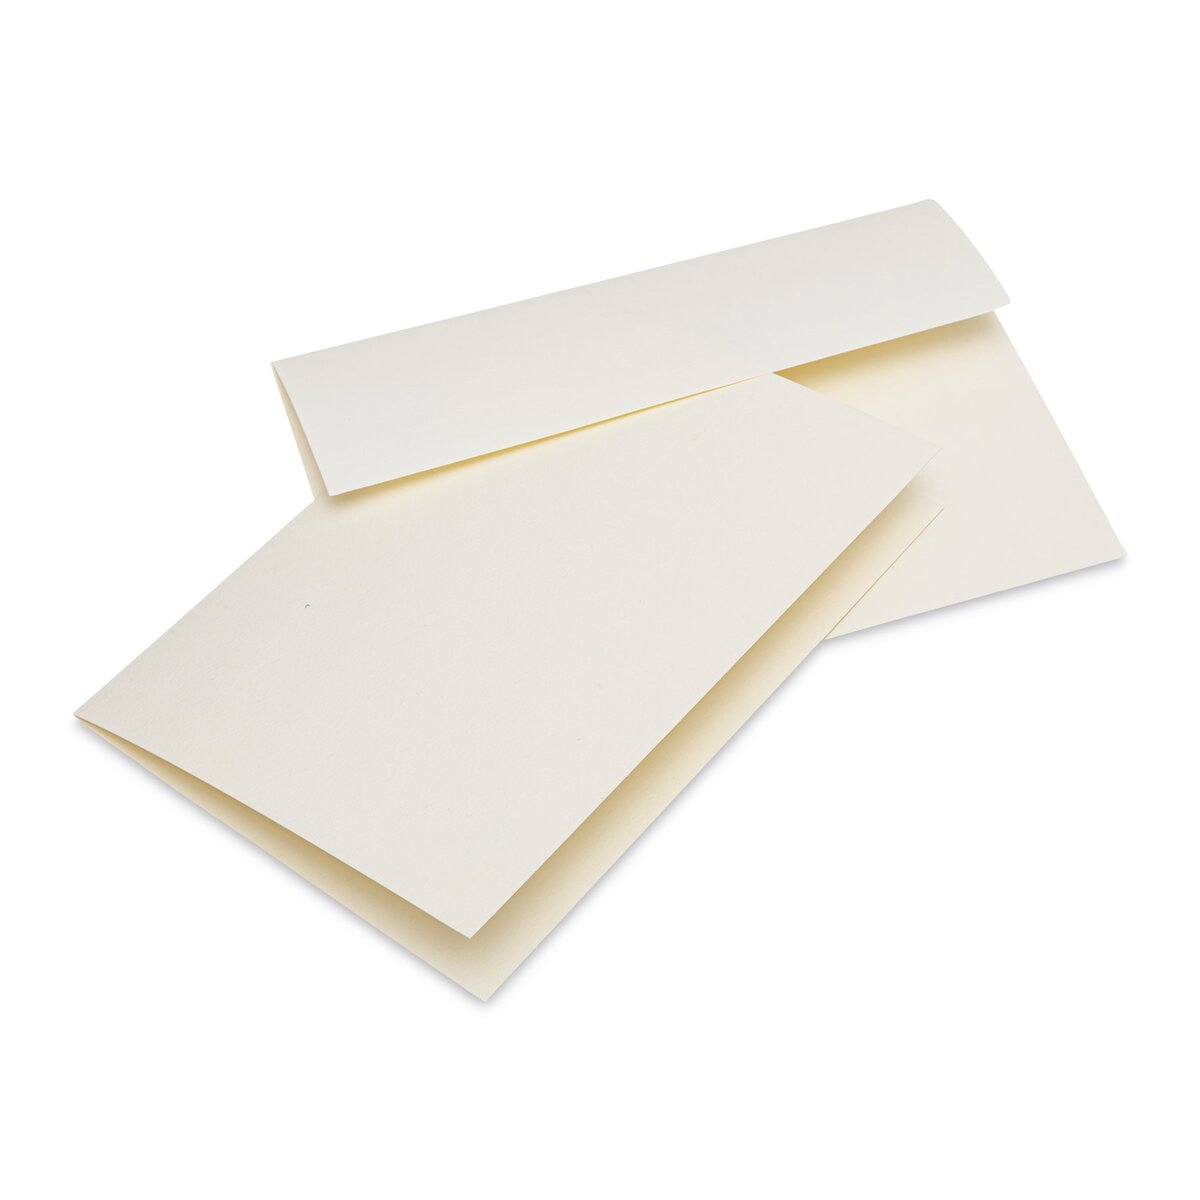 Strathmore Blank Watercolor Greeting Cards Full Size 5x6-7/8 (100 Pack  Cards & Envelopes)